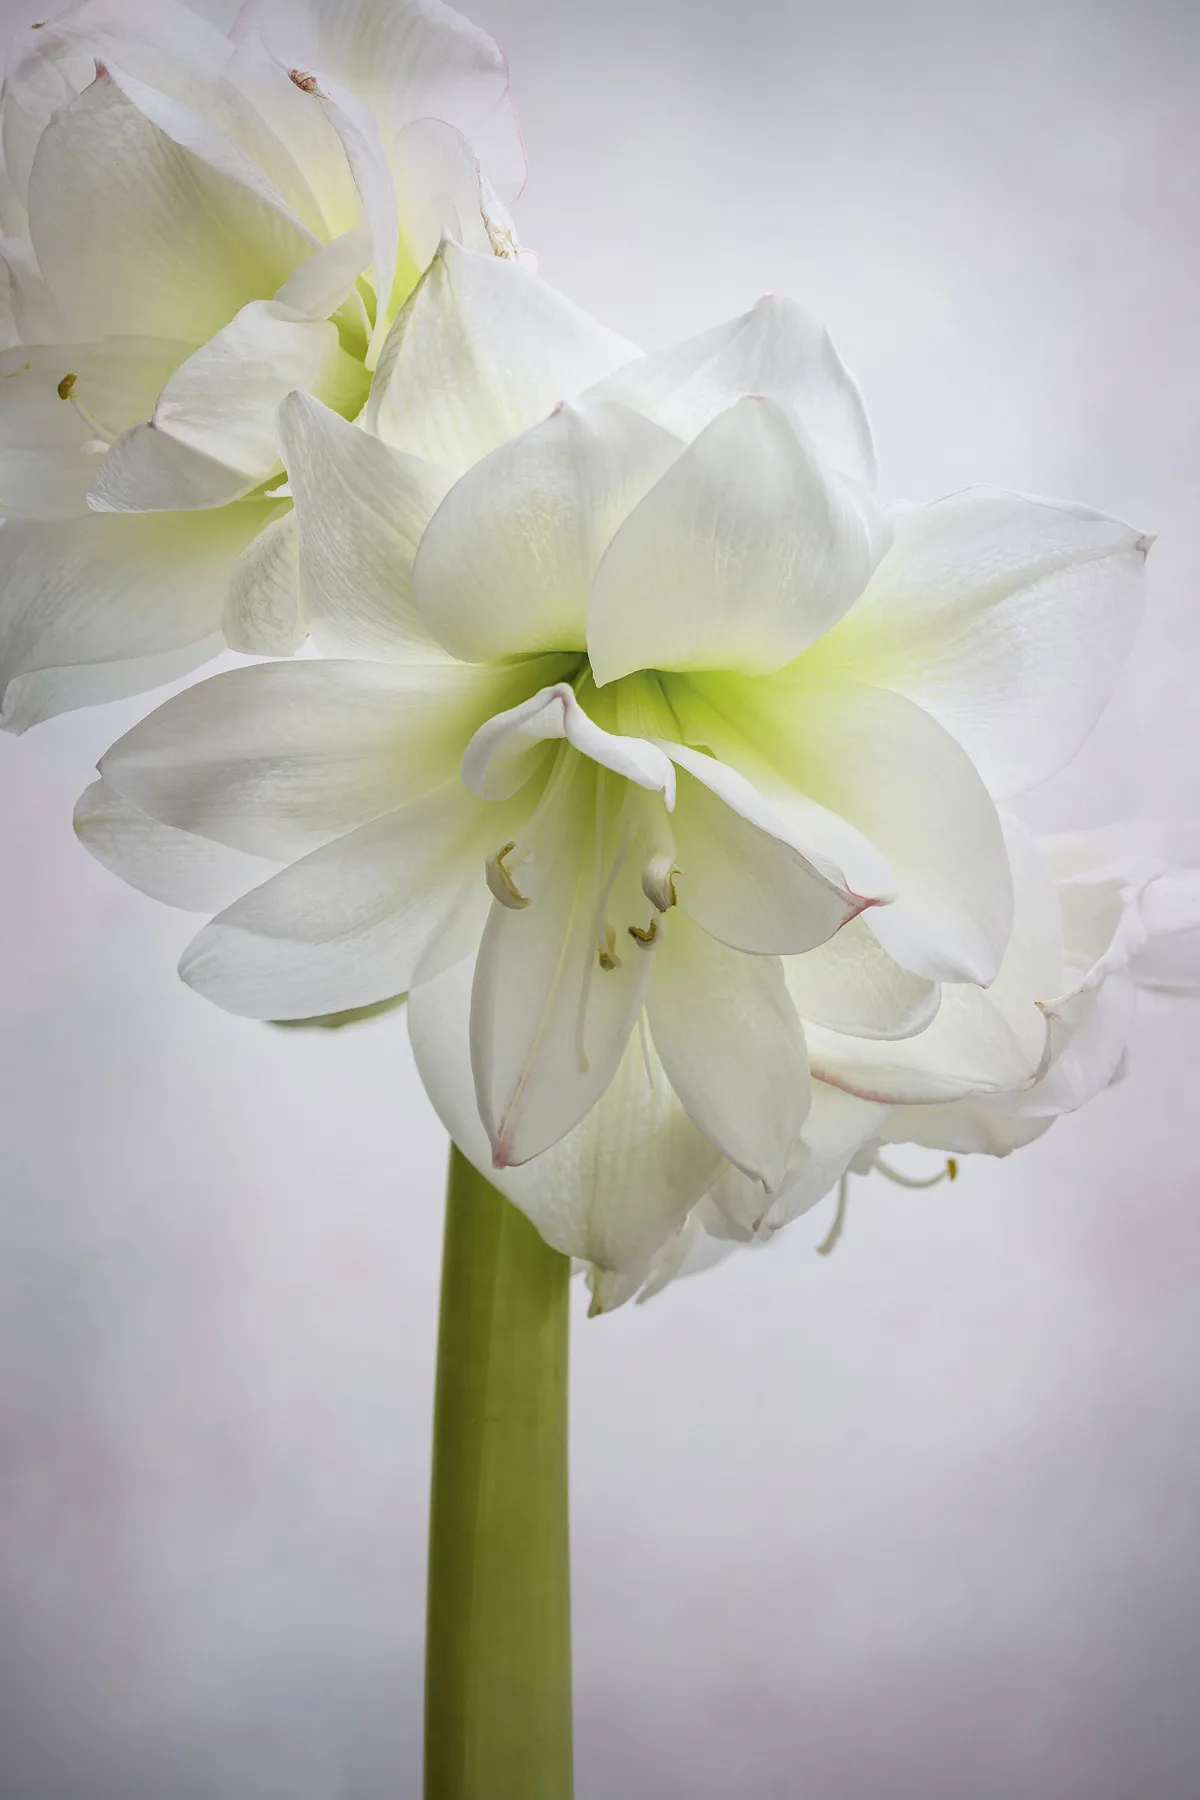 ippeastrum ‘Snow White’ A double-flowered amaryllis with multiple petals and heavy blooms. The stems will need staking to take the flowers’ weight but there’s no denying this is one of the most voluptuous cultivars around. 60cm.